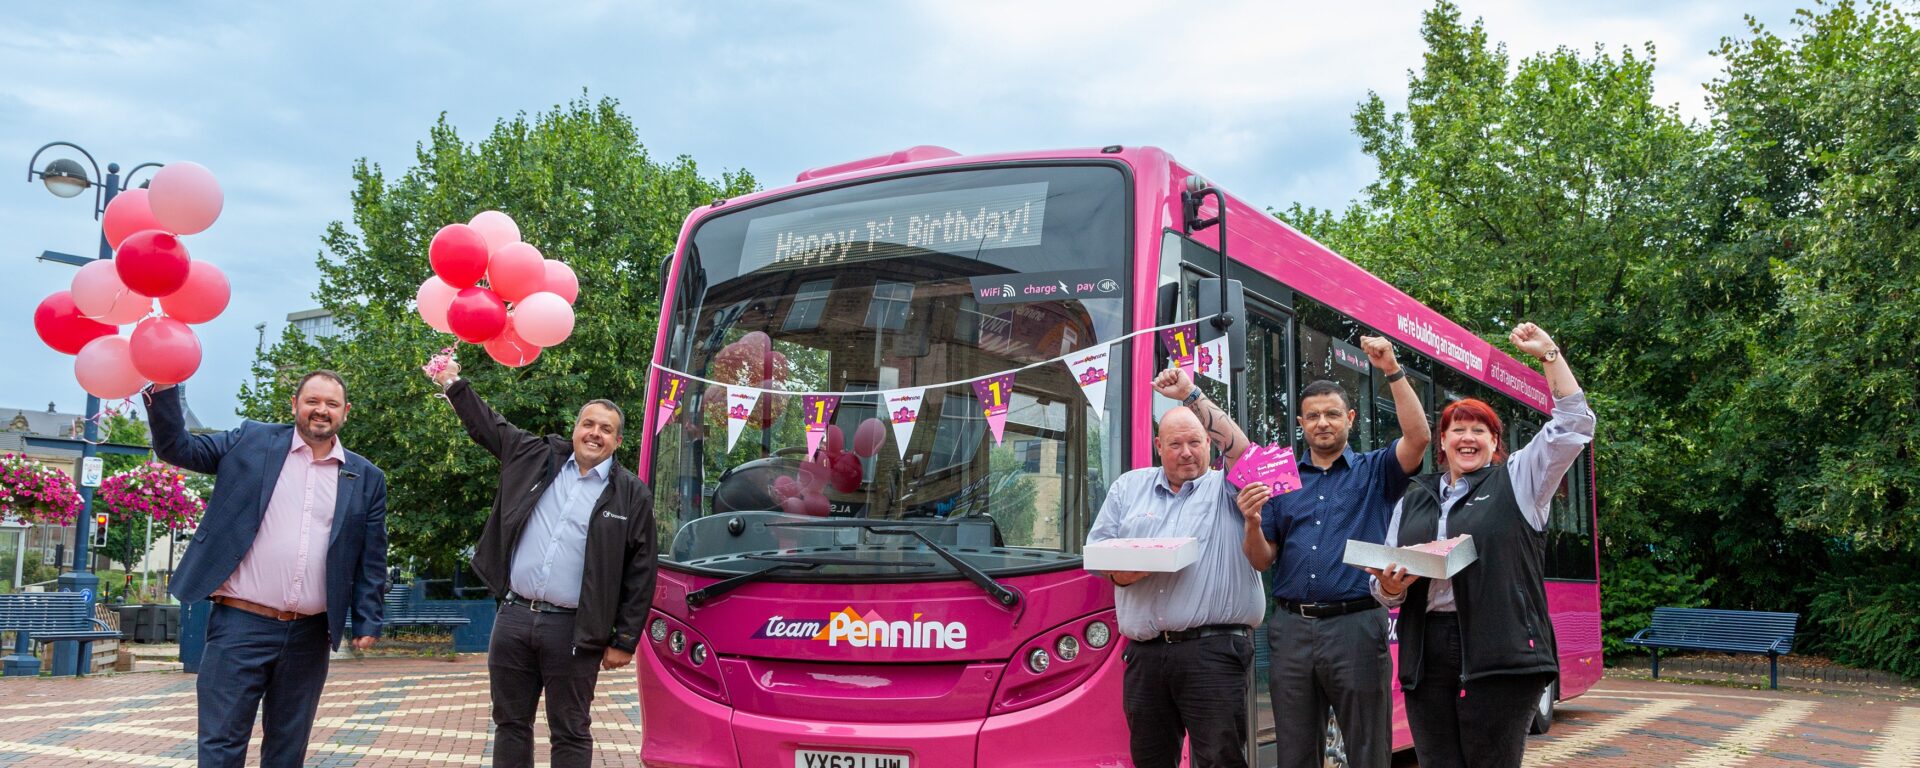 Team Pennine members holding pink baloons, standing in front of a pink bus